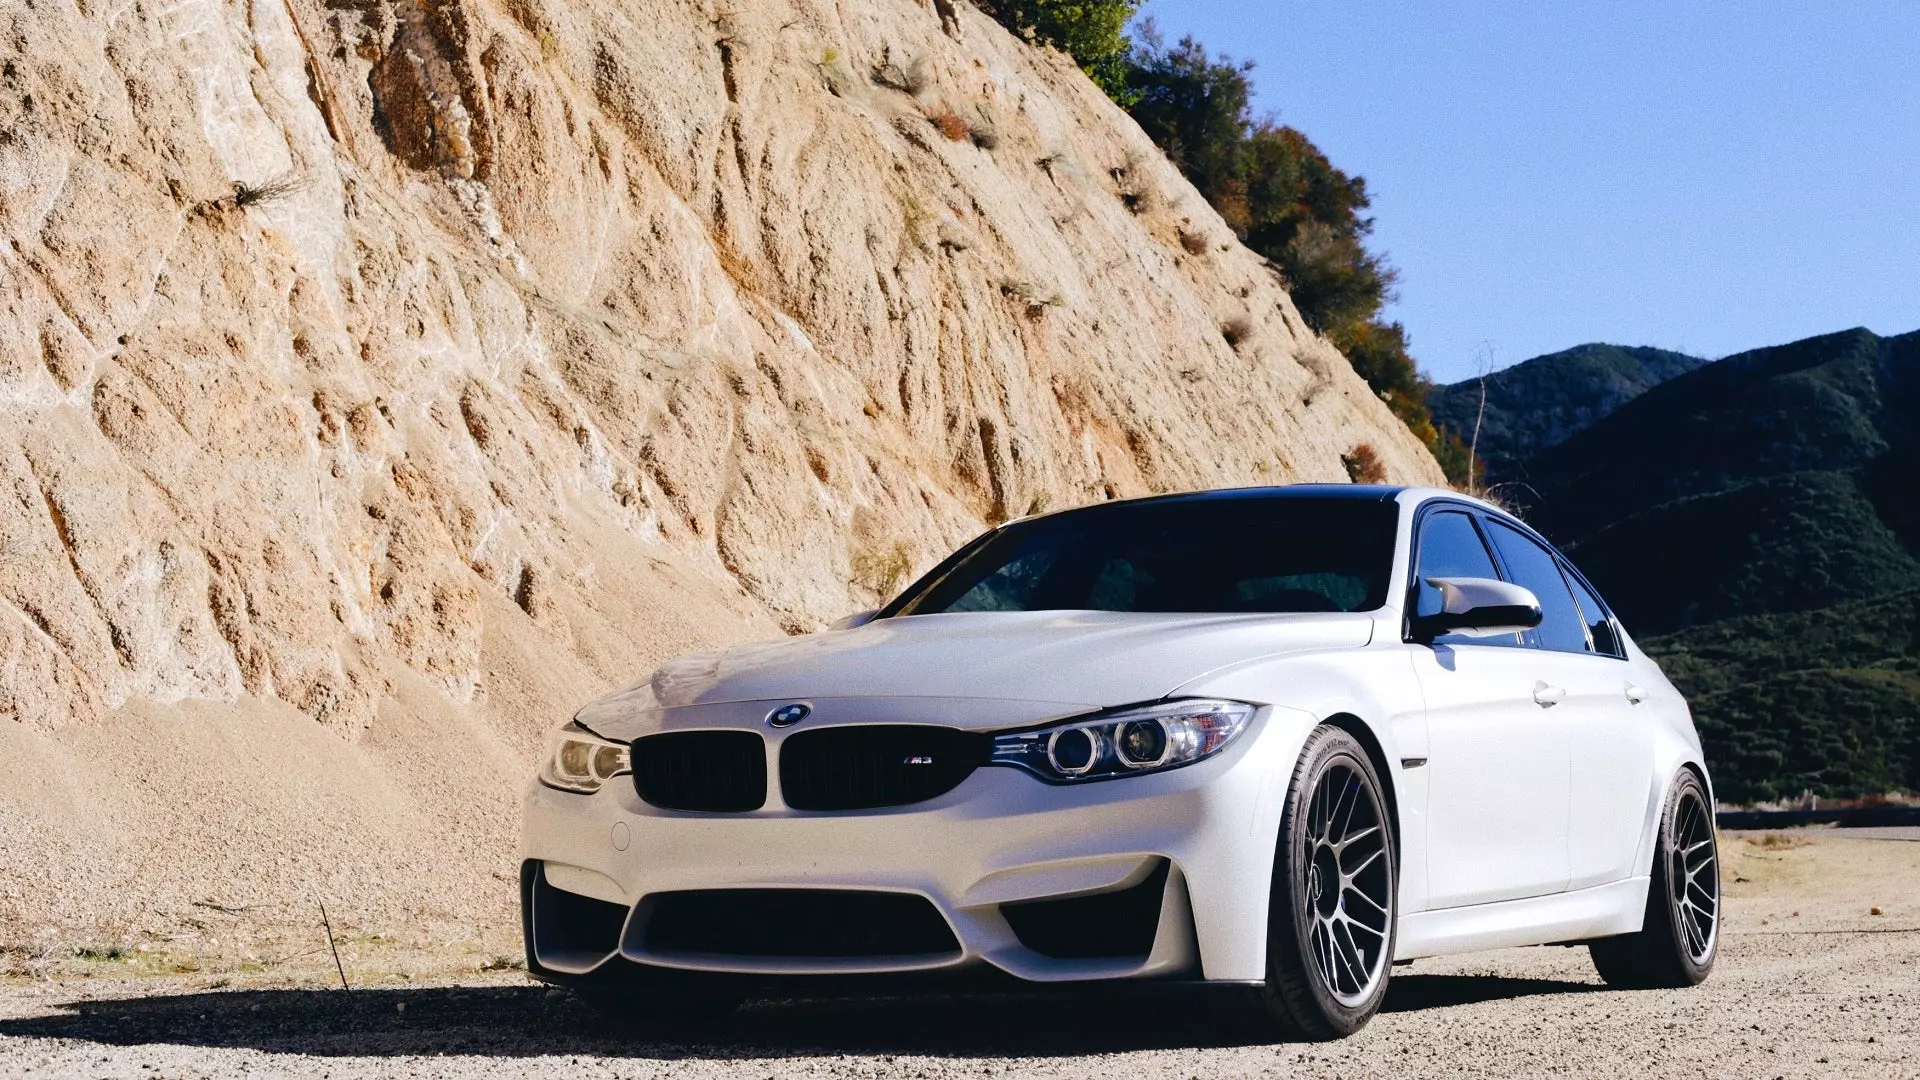 Understated and Underrated: The F80 M3 Might Be a Future Favorite